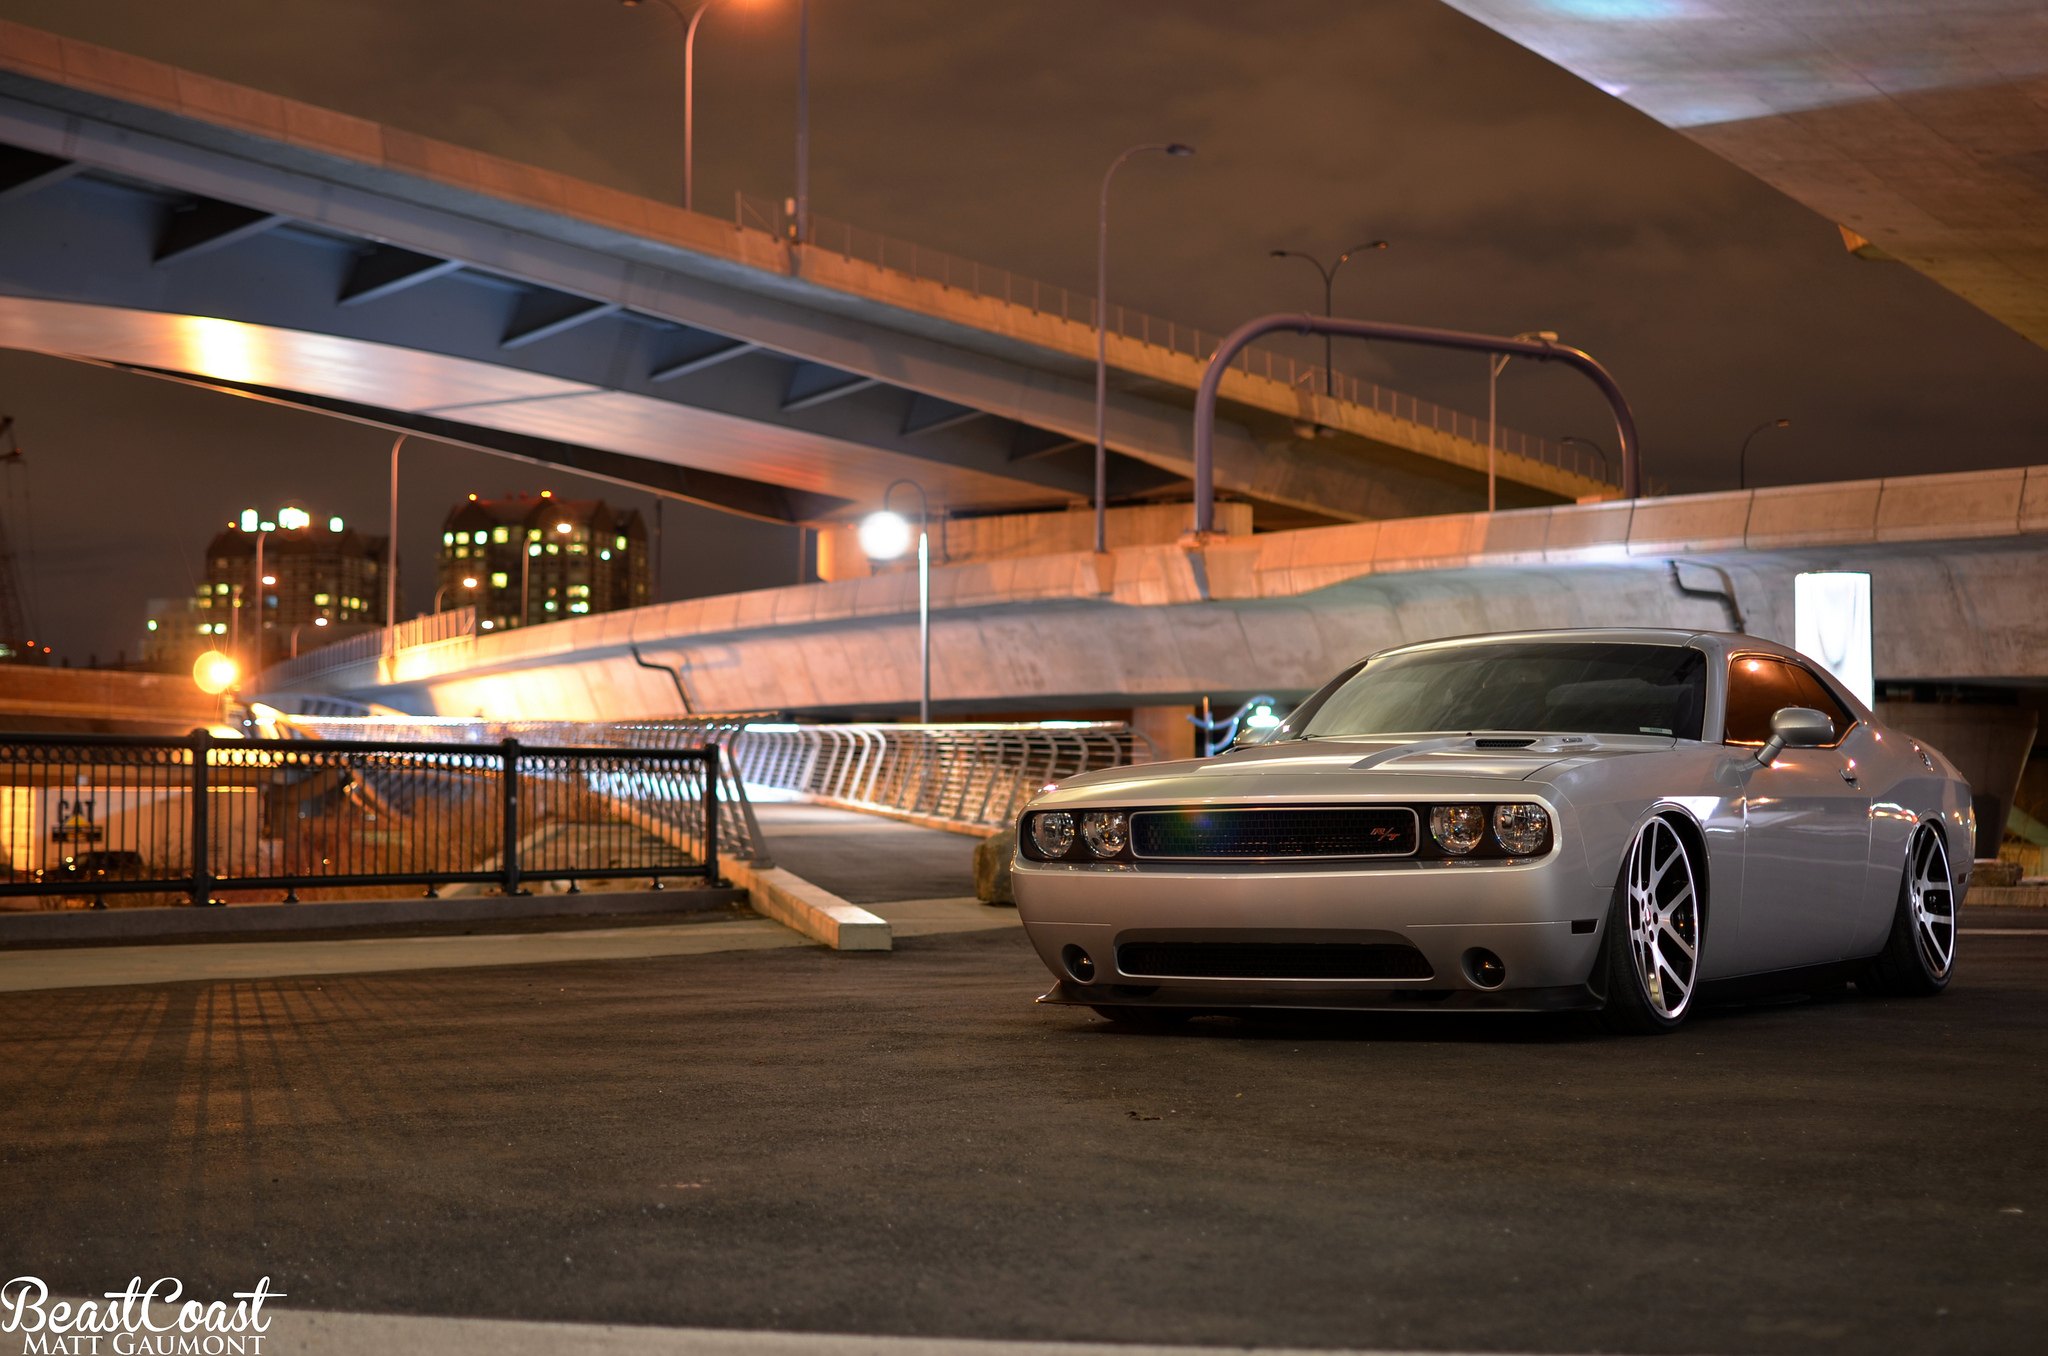 Dodge Challenger RT with Aftermarket Body Kit - Photo by Matthew Gaumont